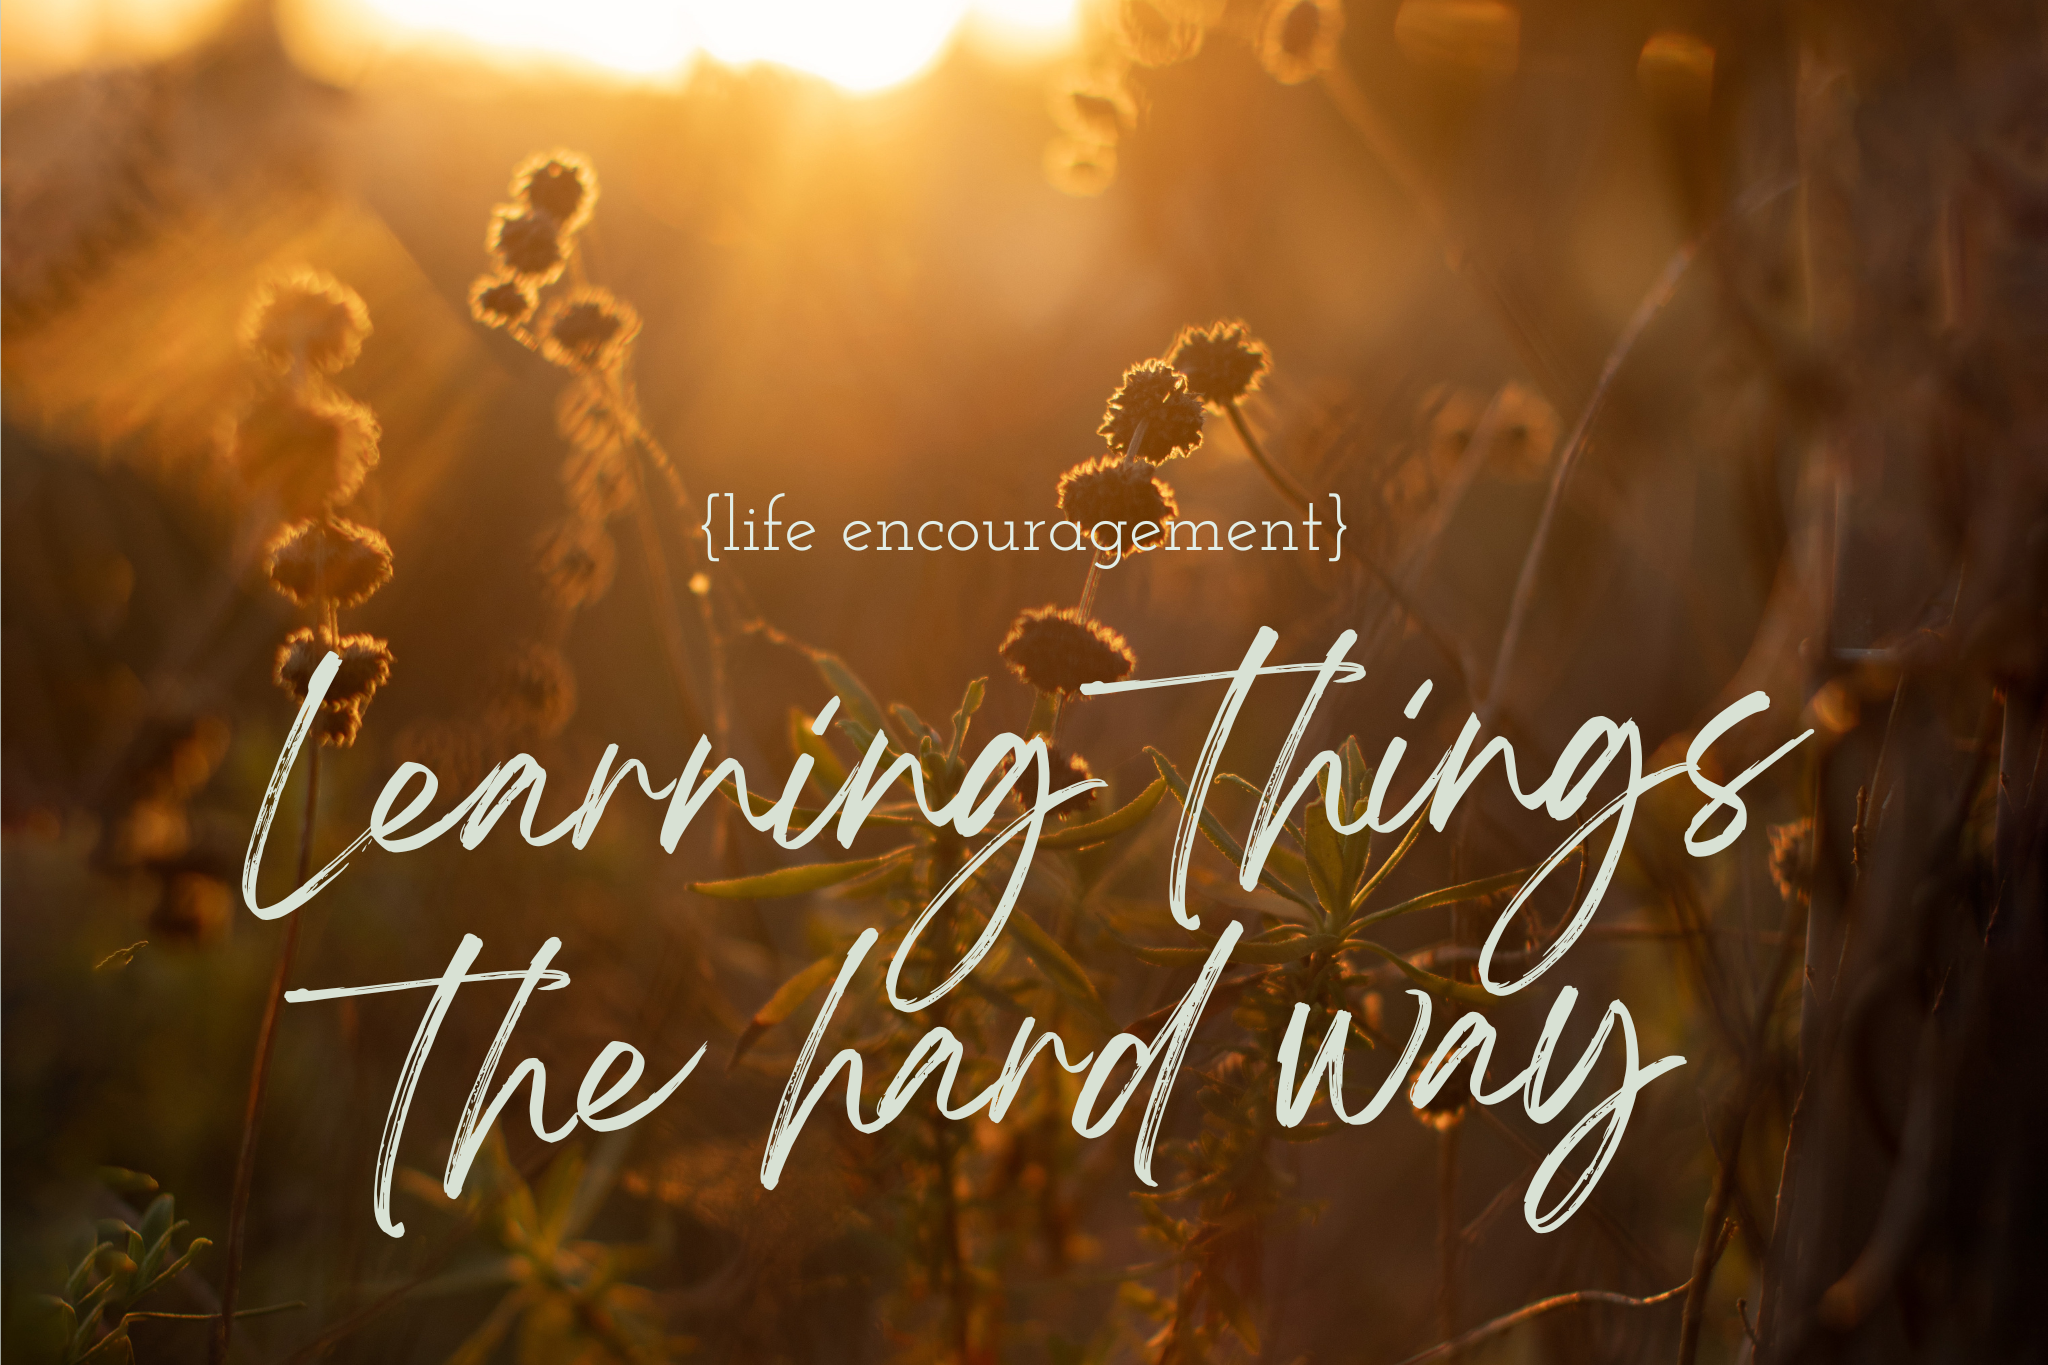 LEARNING HARD WAY QUOTES –